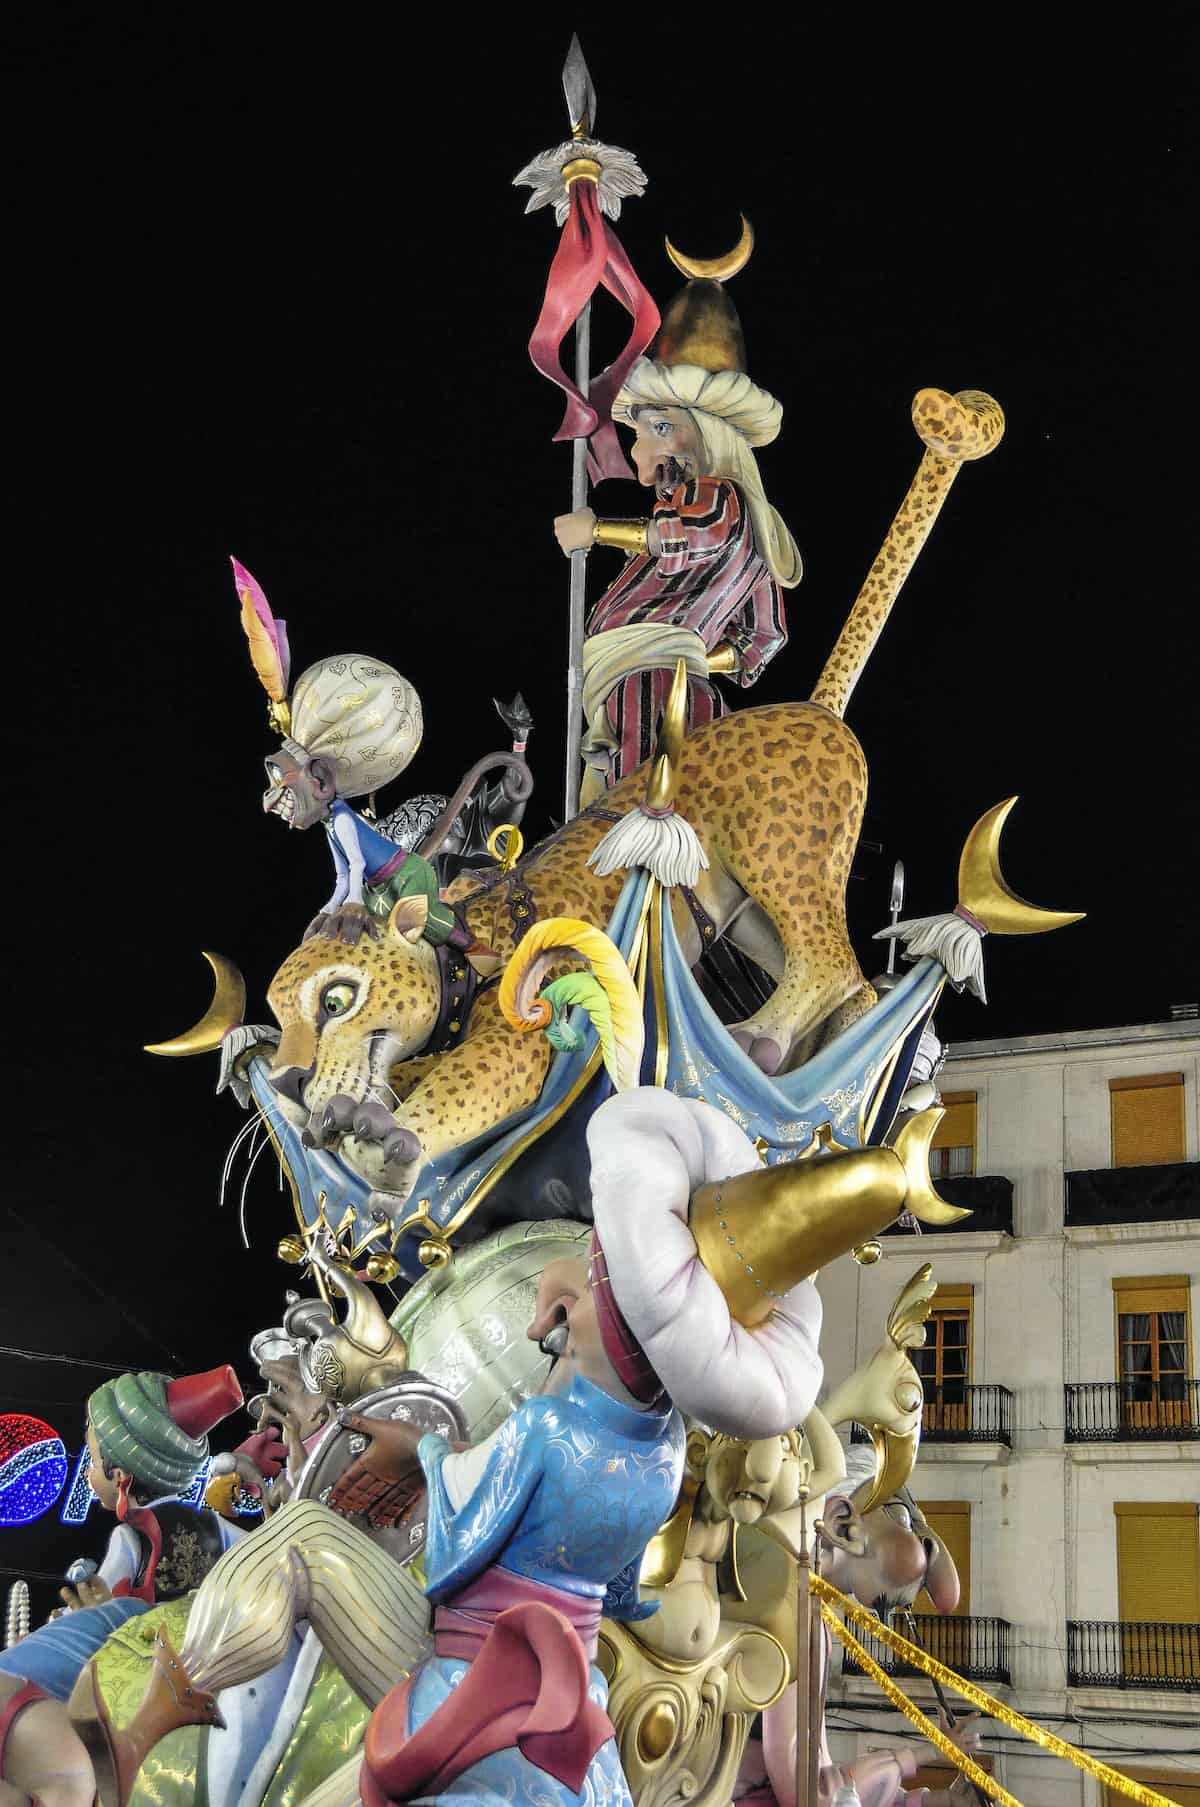 Giant paper sculpture of a leopard and colorful fantasy characters against the night sky.